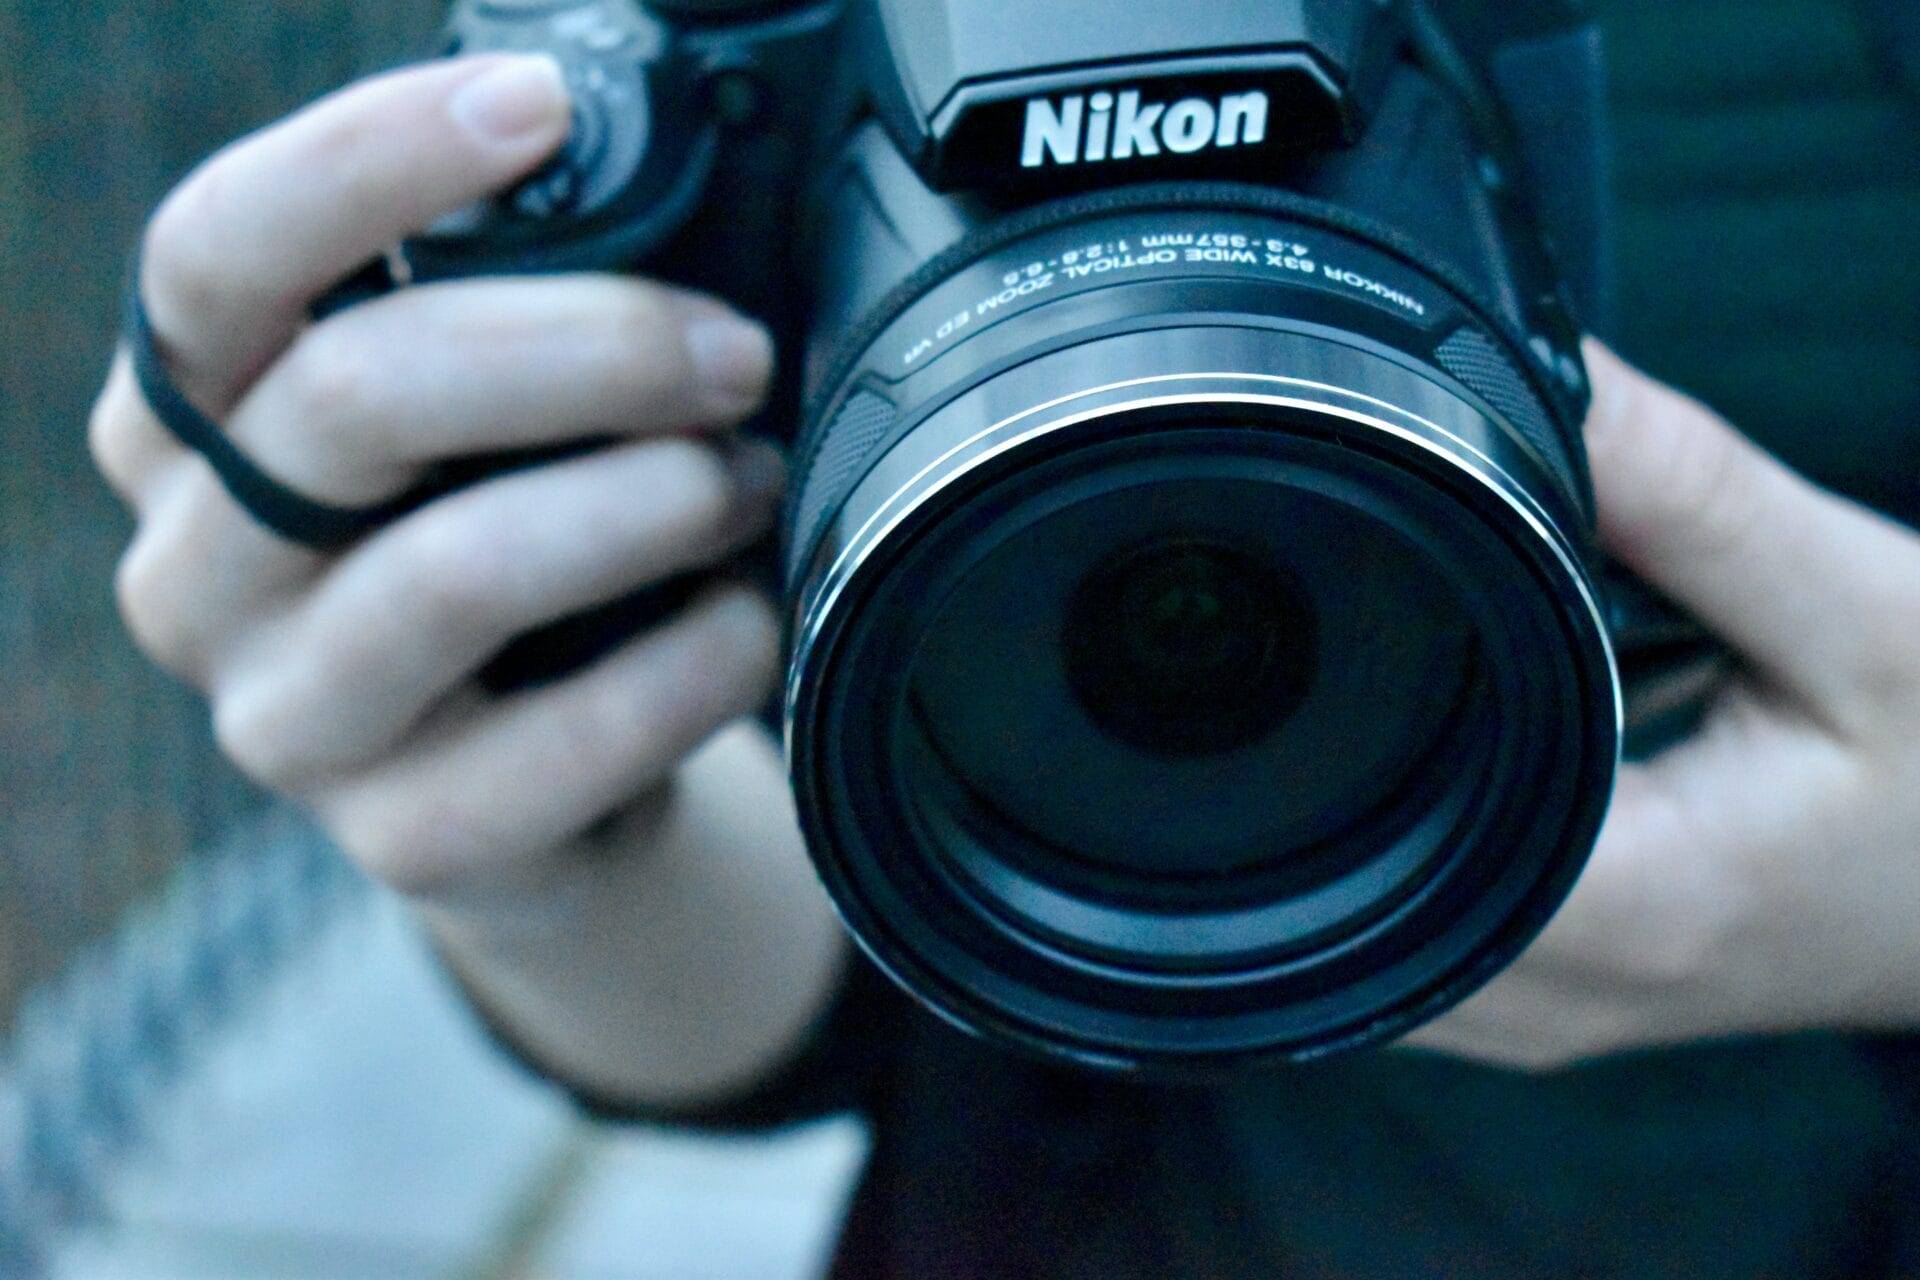 A person is learning photography techniques while holding a Nikon DSLR camera.